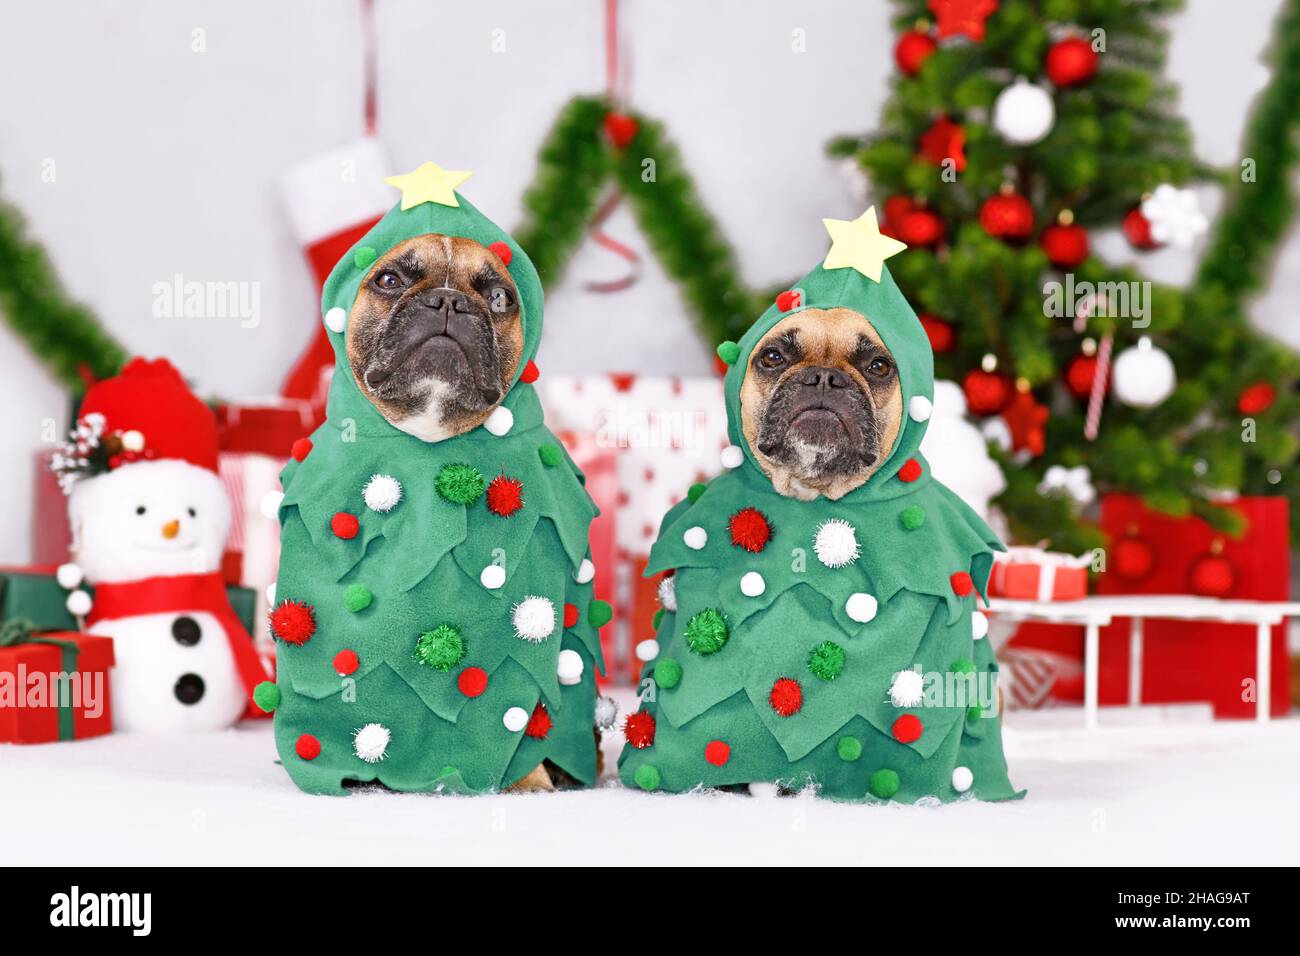 Pair of French Bulldog dogs wearing Christmas tree costumes between Christmas trees and gift boxes Stock Photo